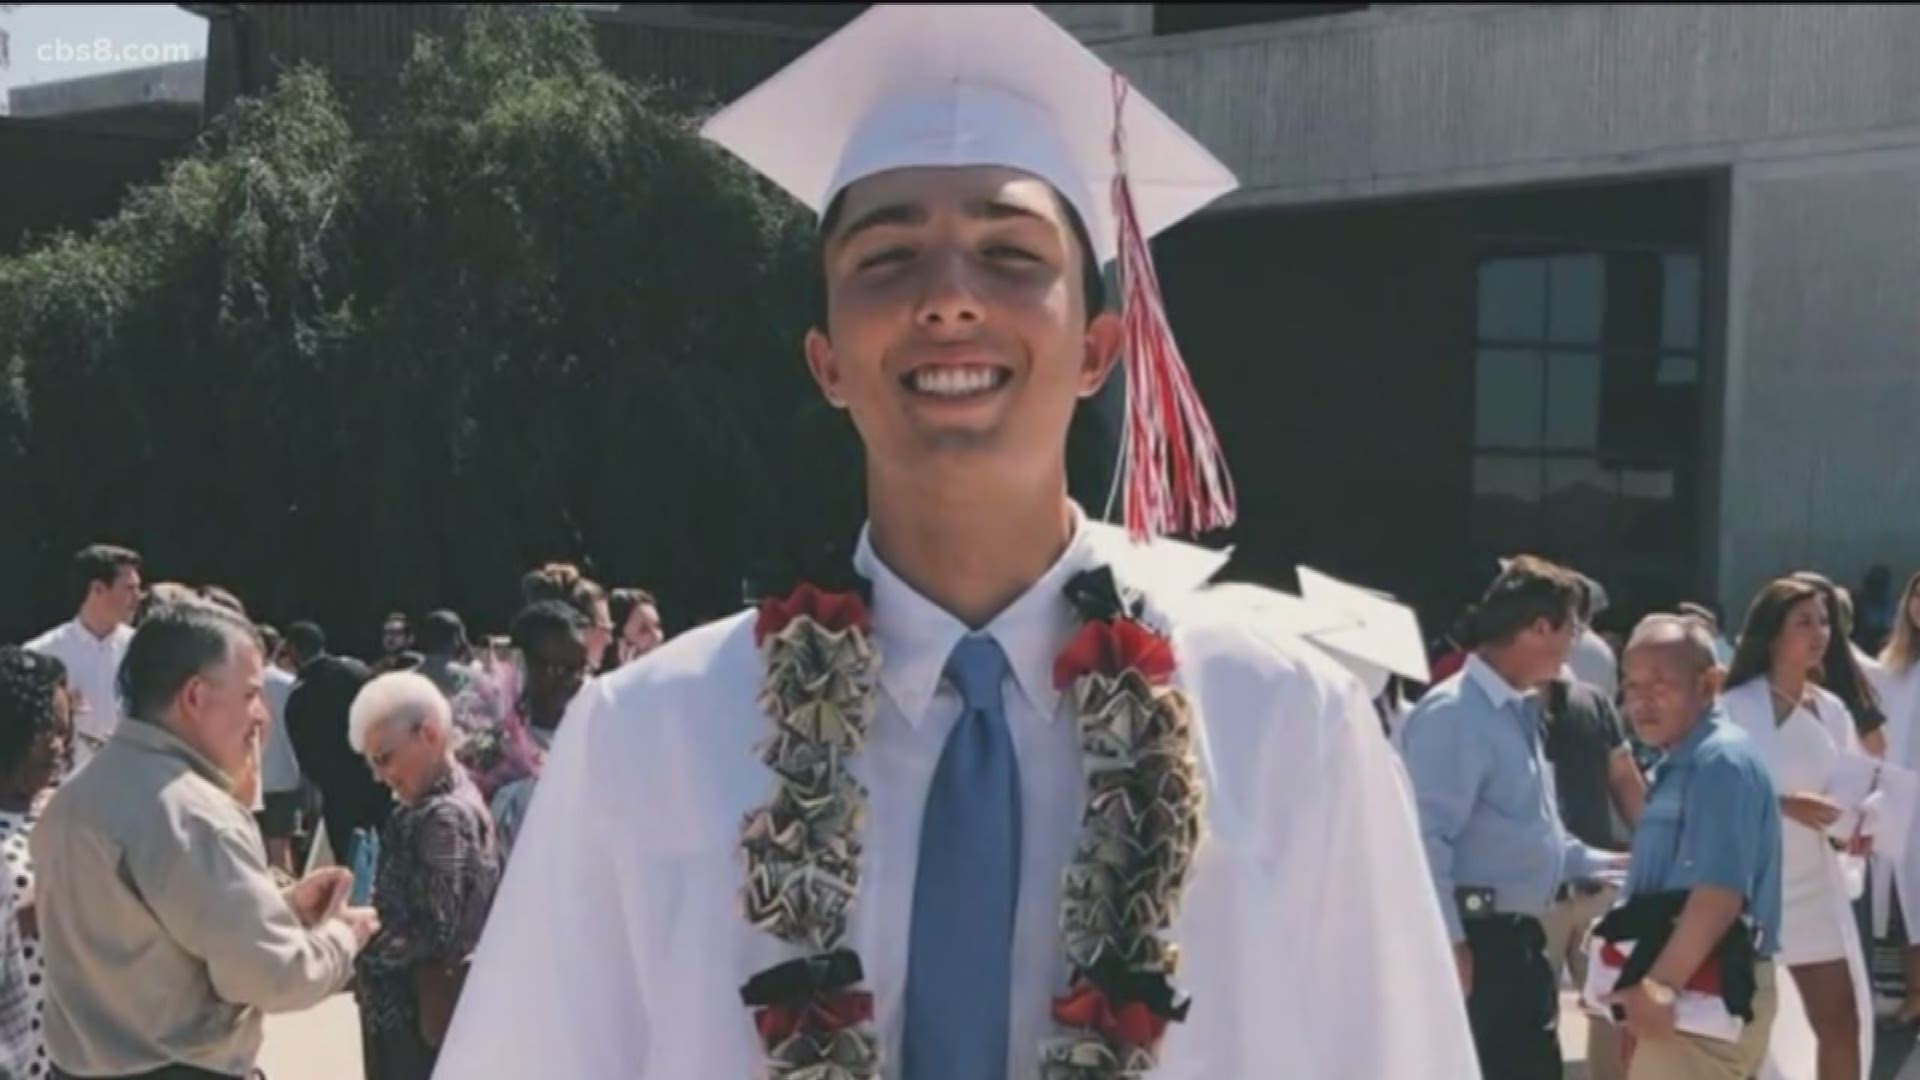 A San Diego Medical Examiner's spokesperson said "alcohol and cannabinoids were not a contributing factor" to Dylan Hernandez's death.